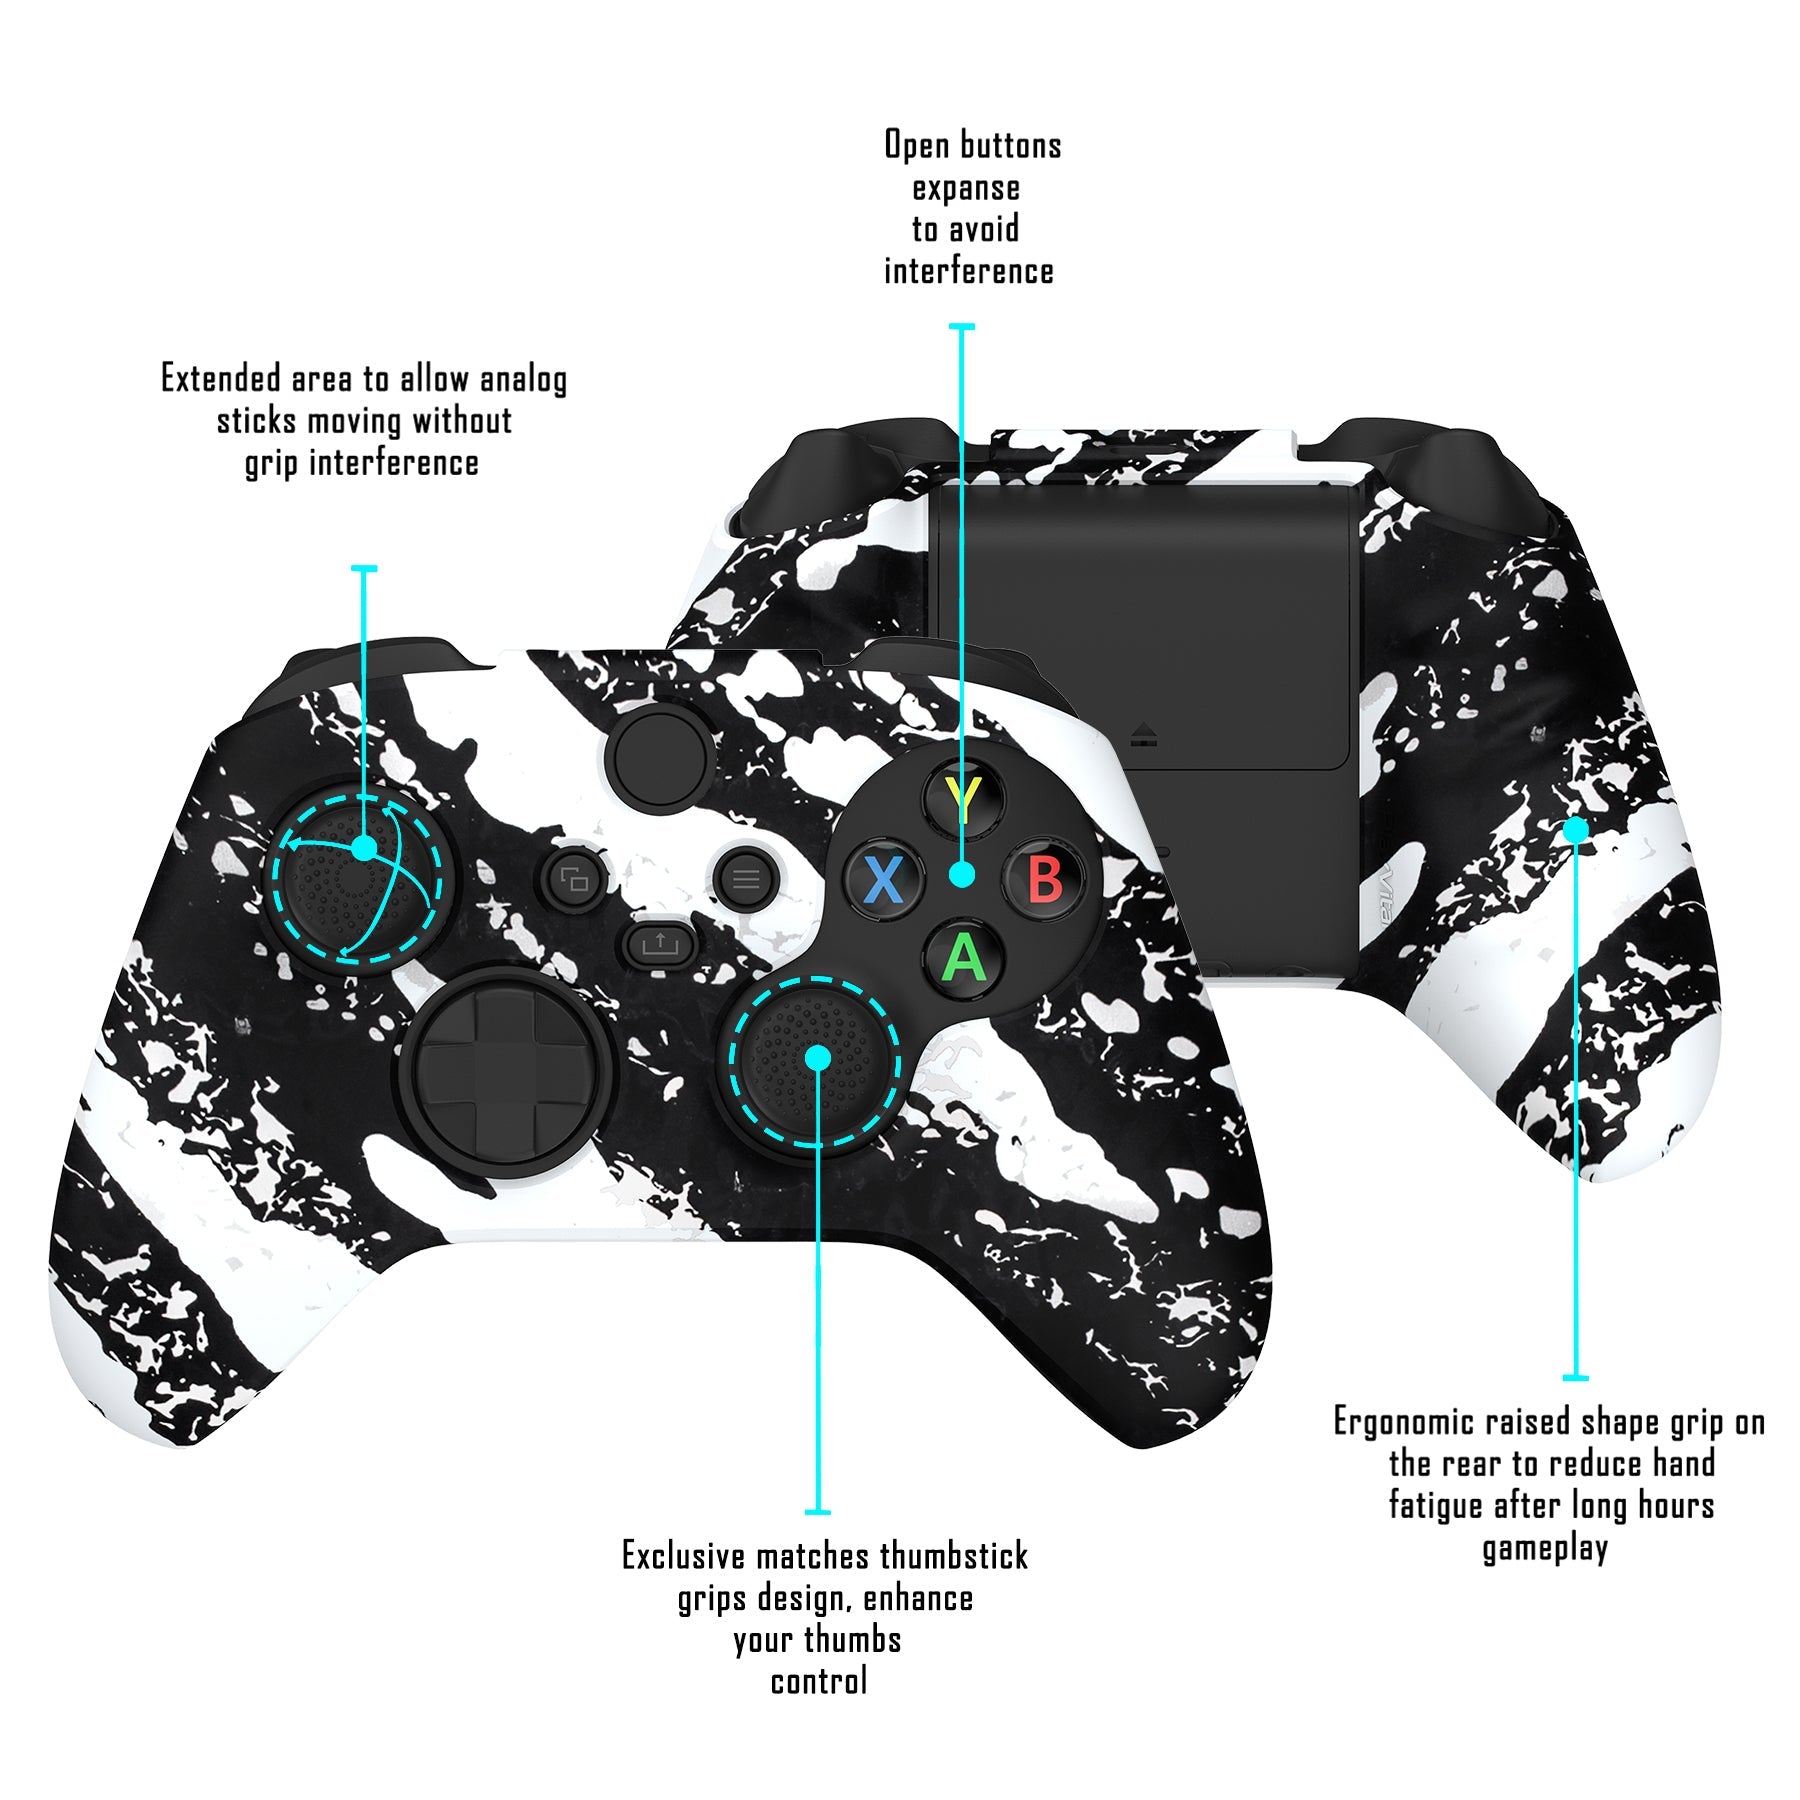 PlayVital Water Transfer Printing White Splash Pattern Silicone Cover Skin for Xbox Series X/S Controller, Soft Rubber Case Protector for Xbox Series X/S, Xbox Core Controller wtih 6 Thumb Grip Caps - BLX3020 PlayVital